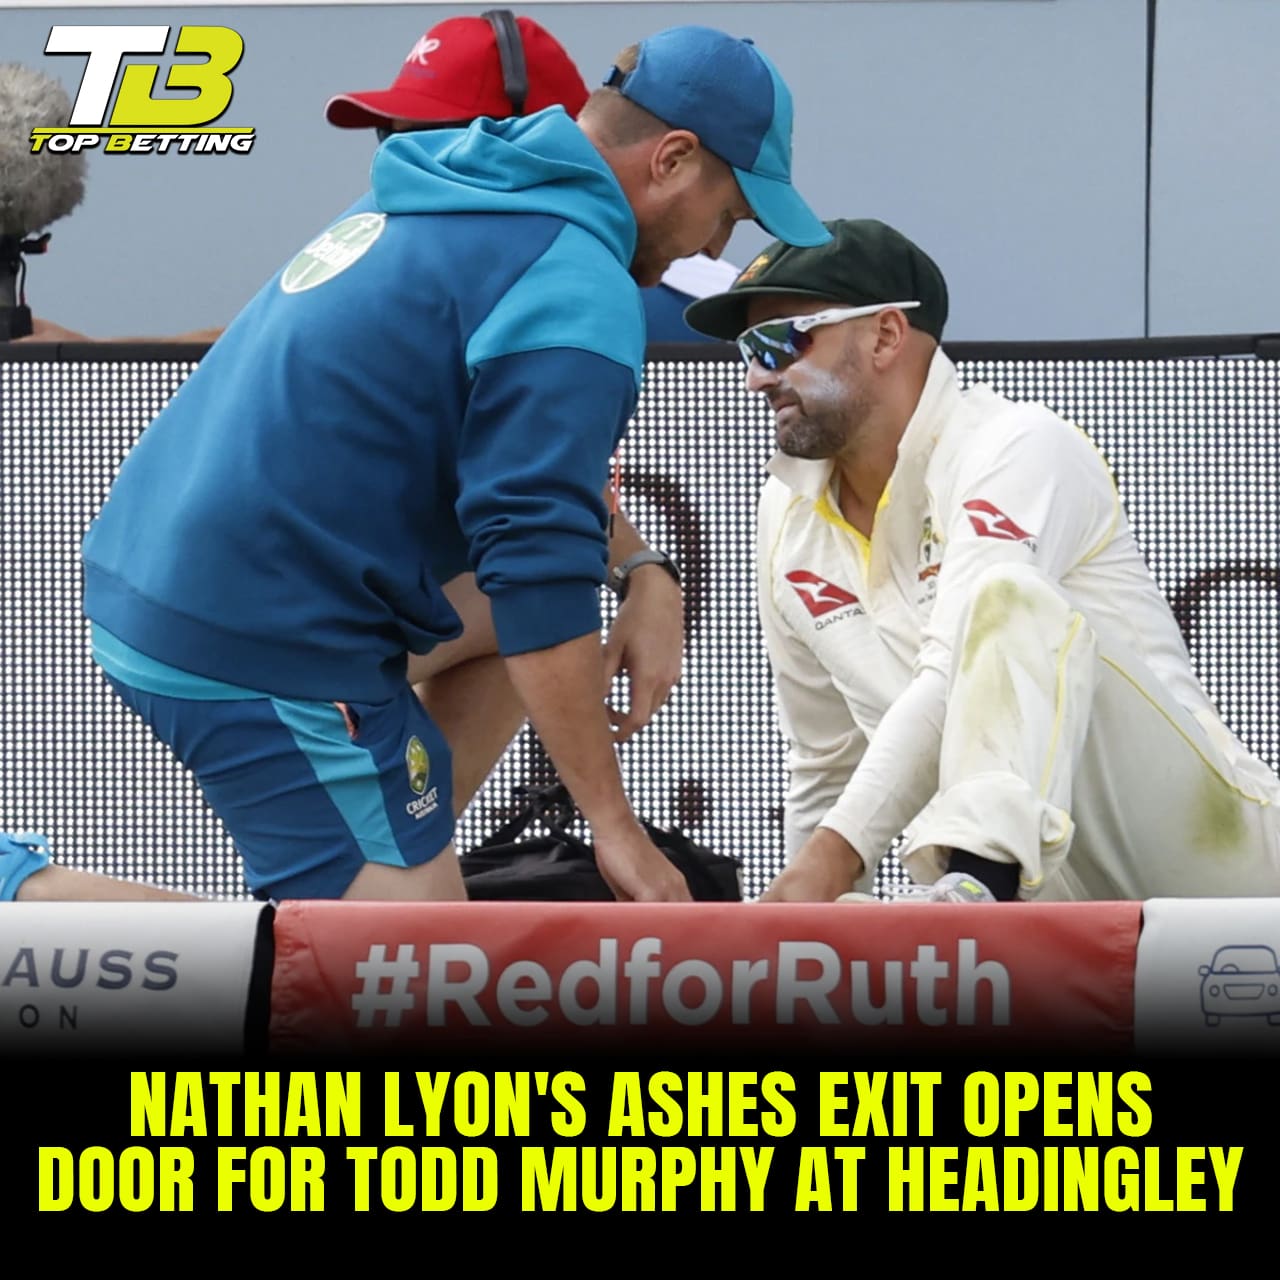 Nathan Lyon’s Ashes Exit Opens Door for Todd Murphy at Headingly